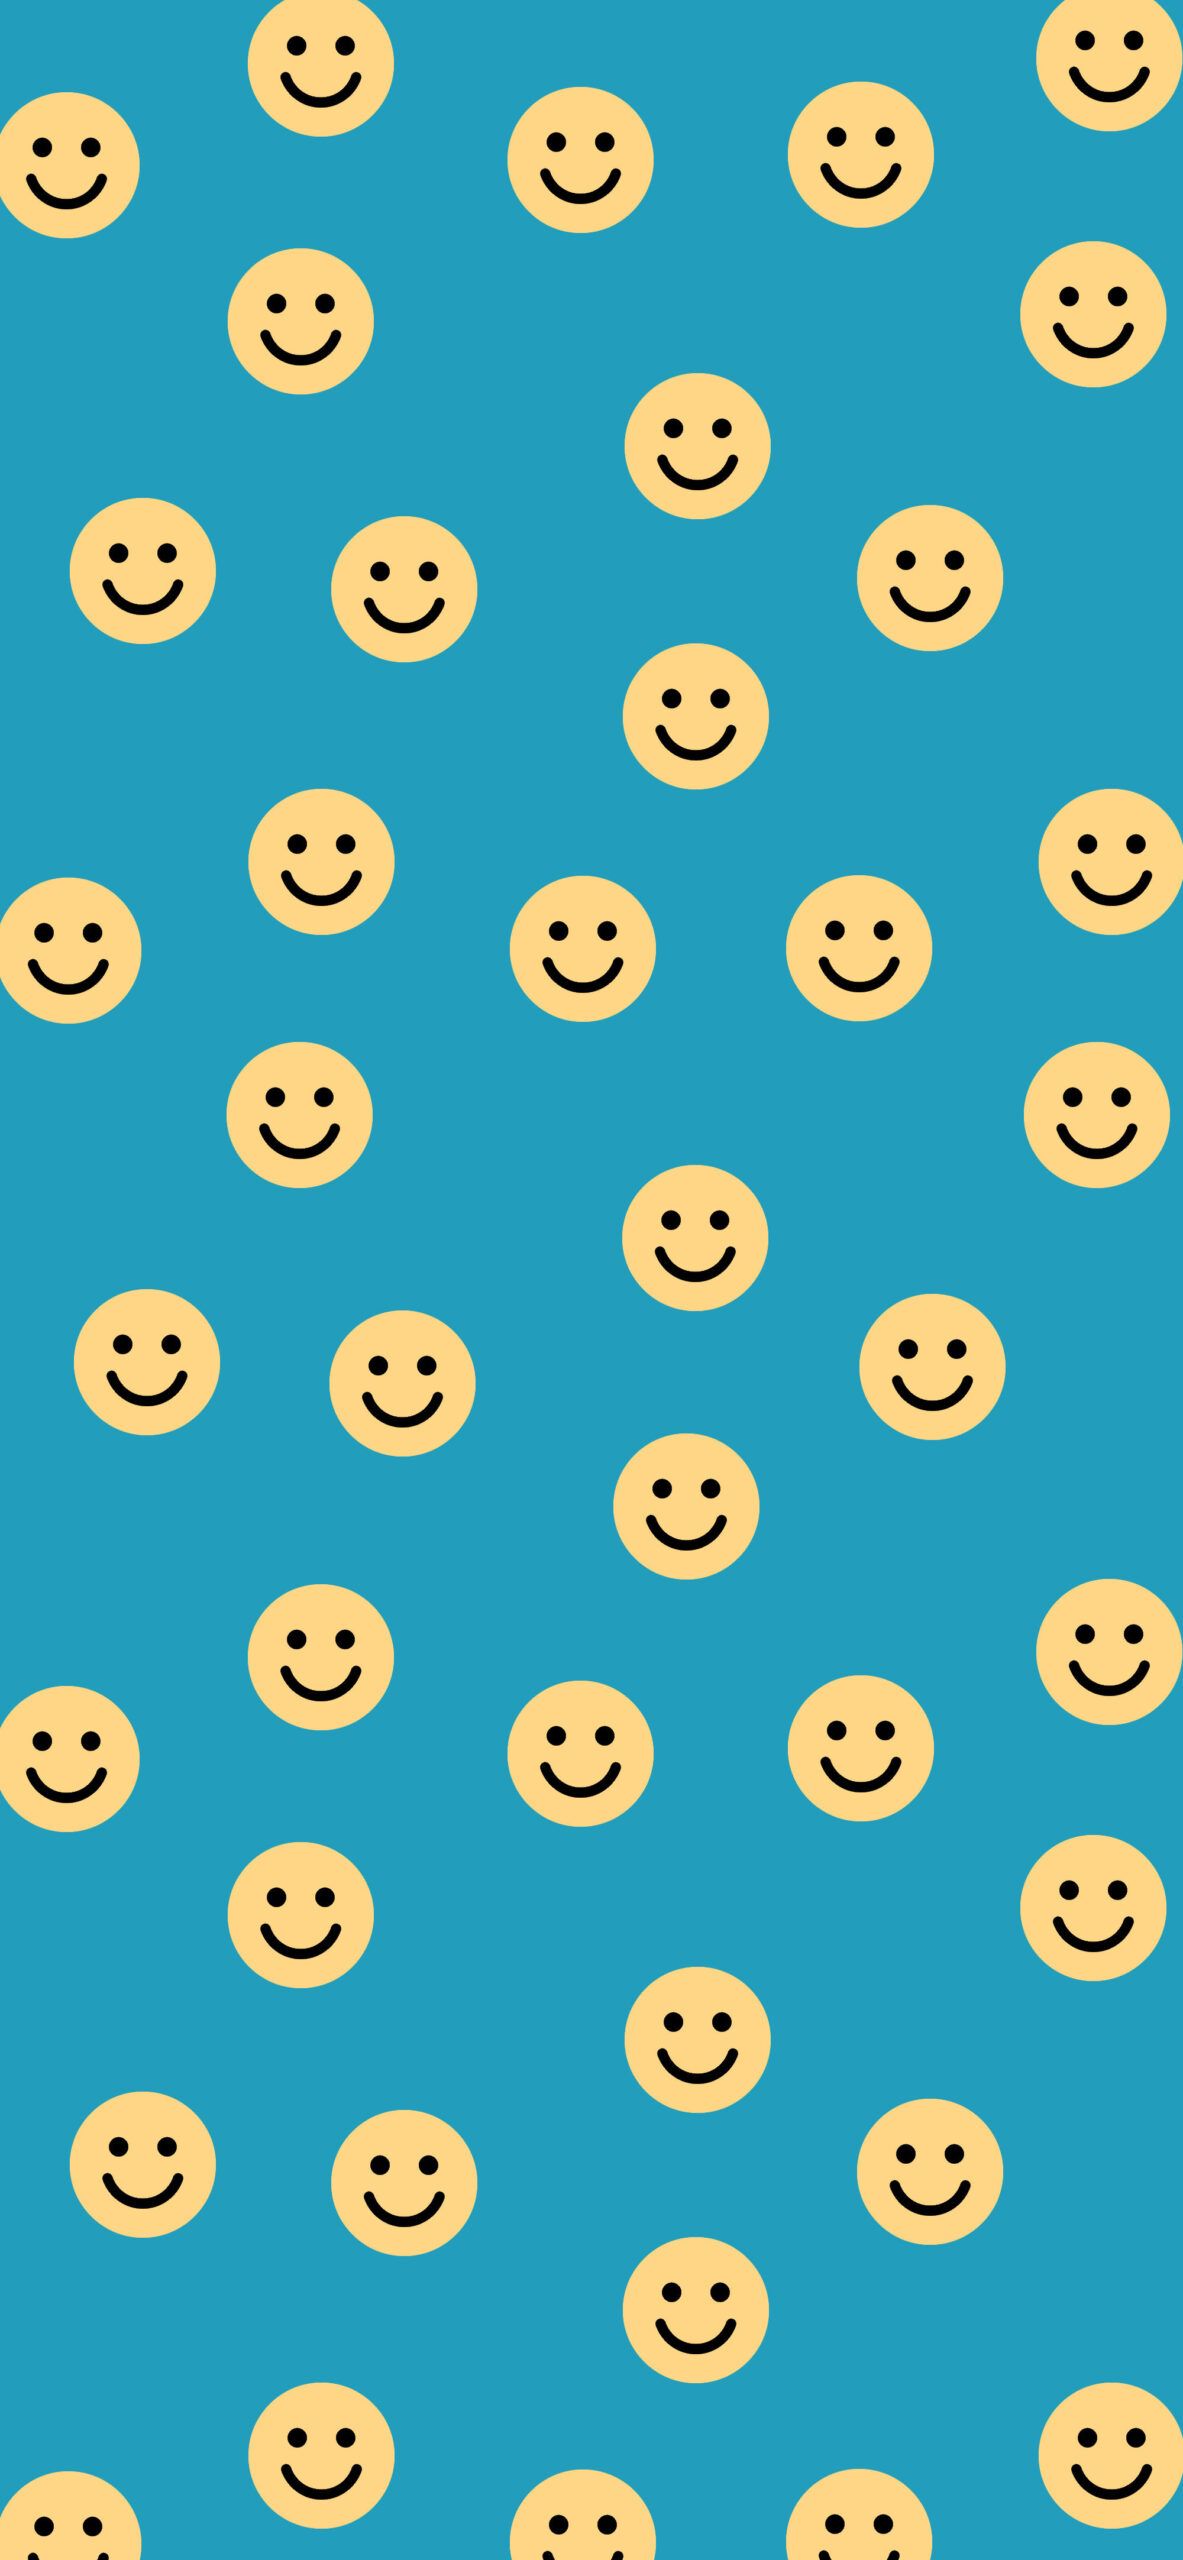 Wallpaper with smiley faces on a blue background - Smiley